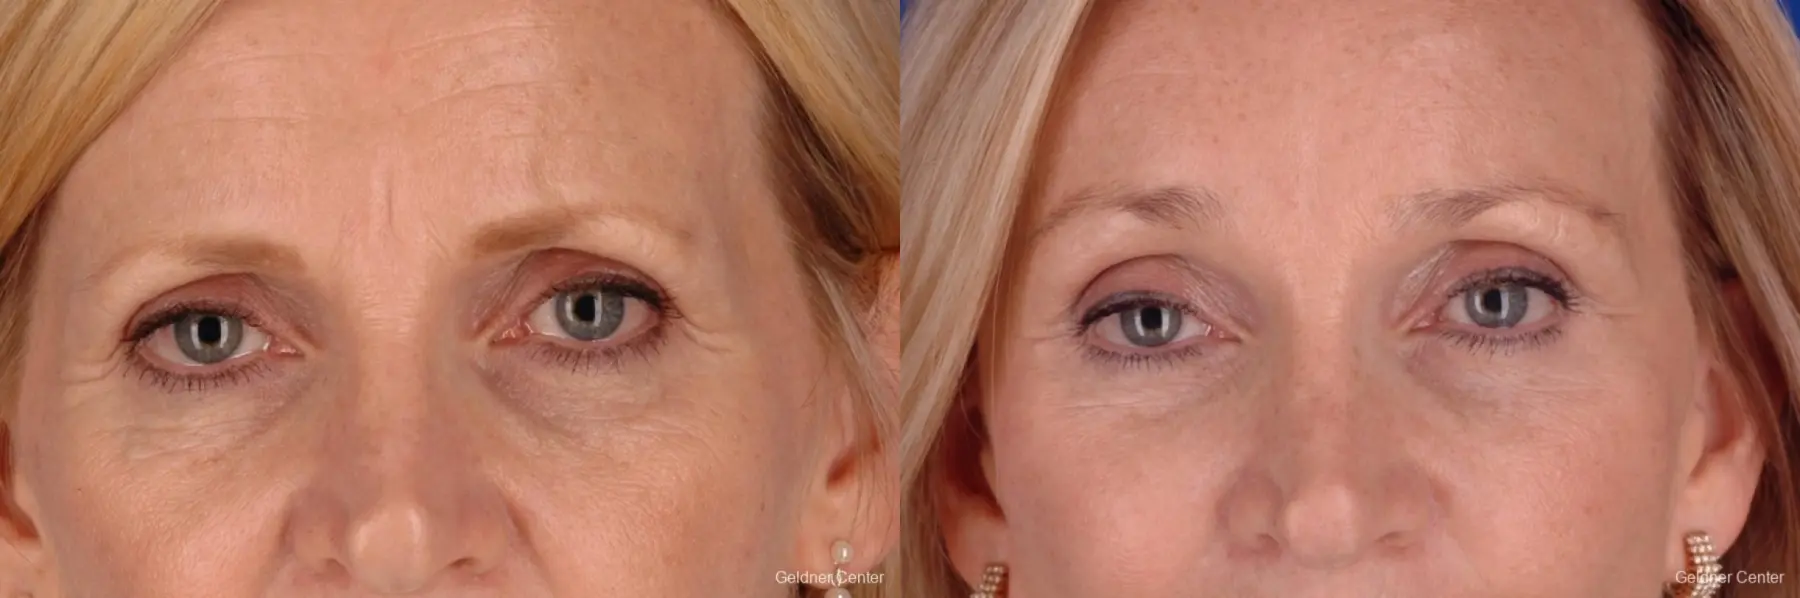 55 year old woman, lower blepharoplasty - Before and After